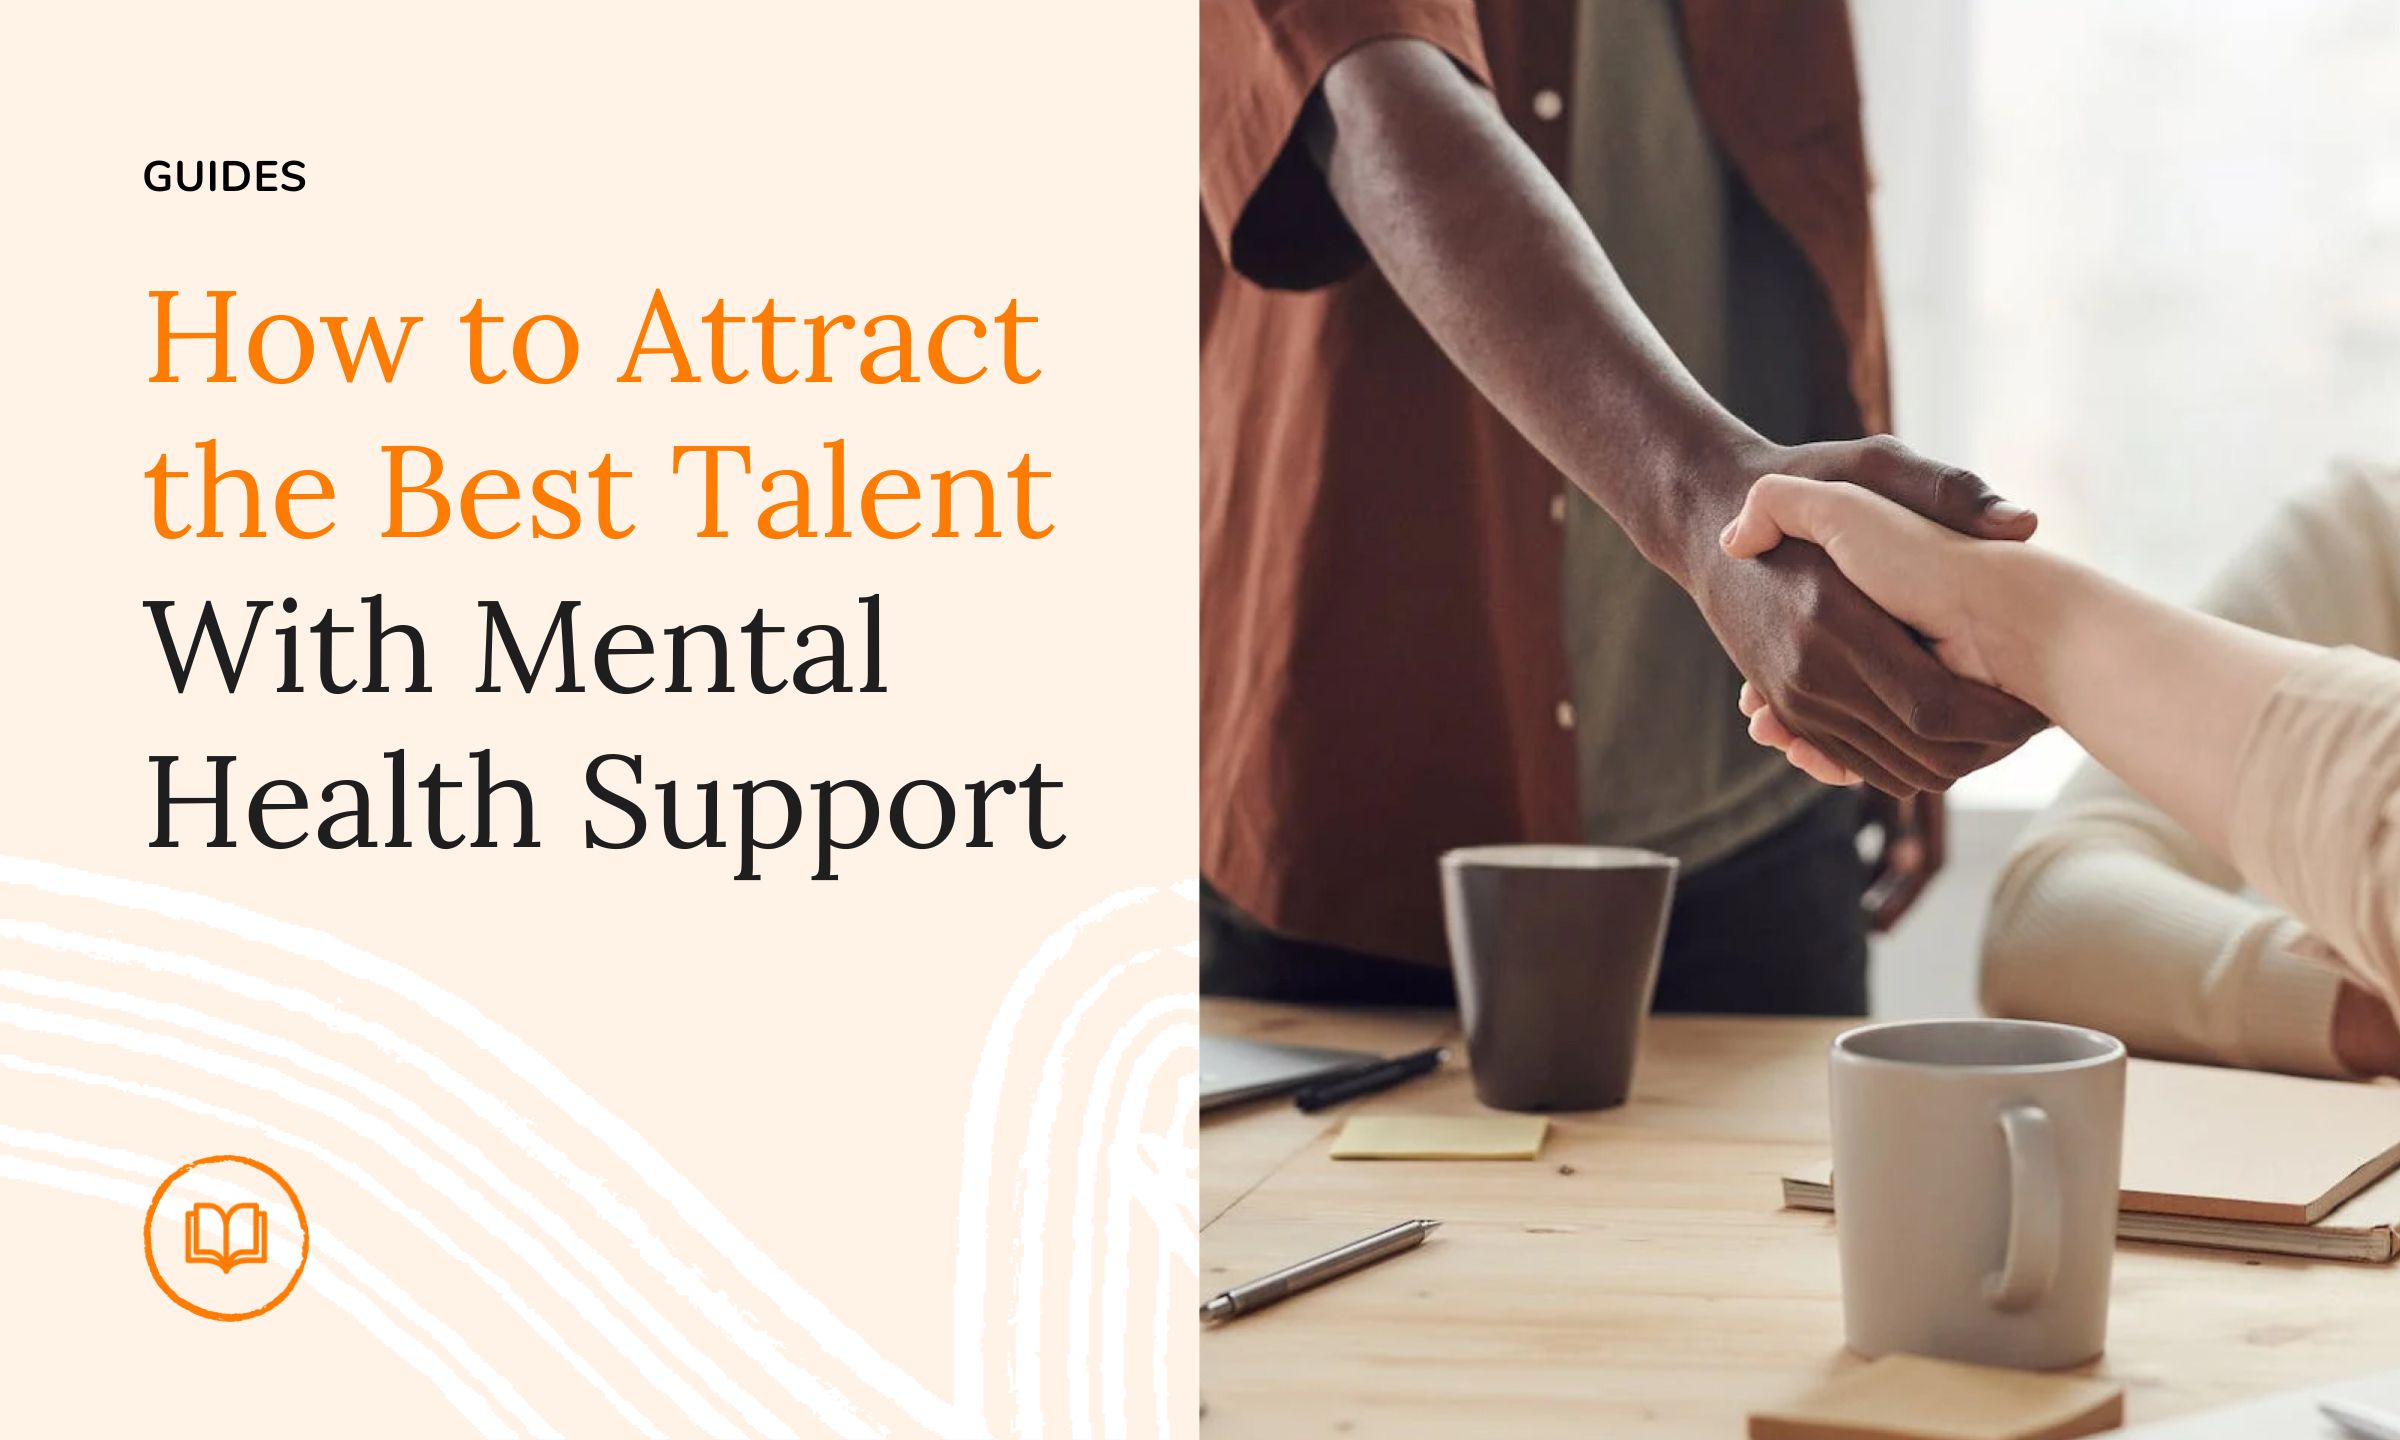 Attract the Best Talent With Mental Health Support